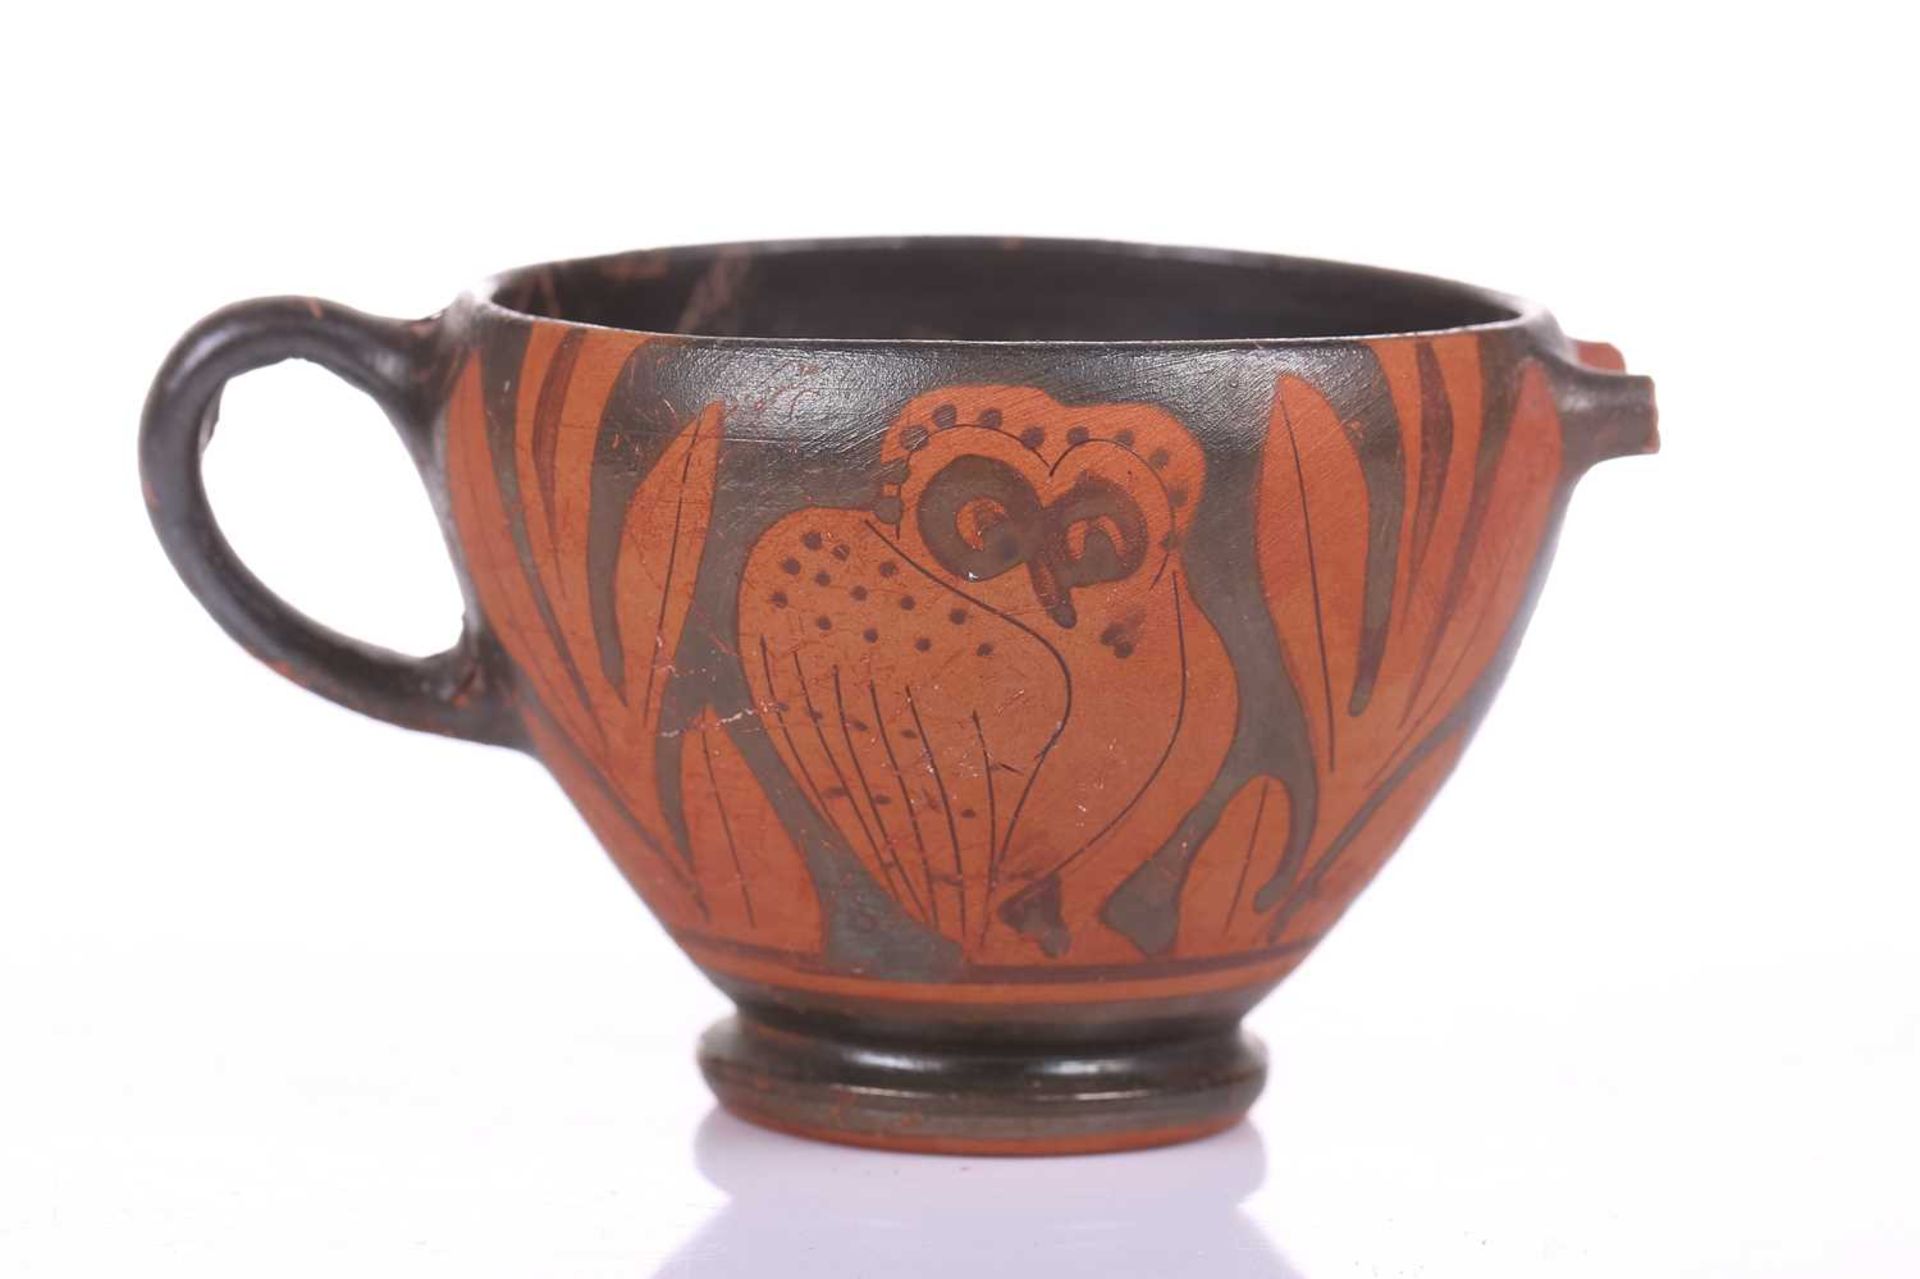 An Athenian-style ritual cup, 4th century BC or later, decorated with the "Owl of Athena" amidst